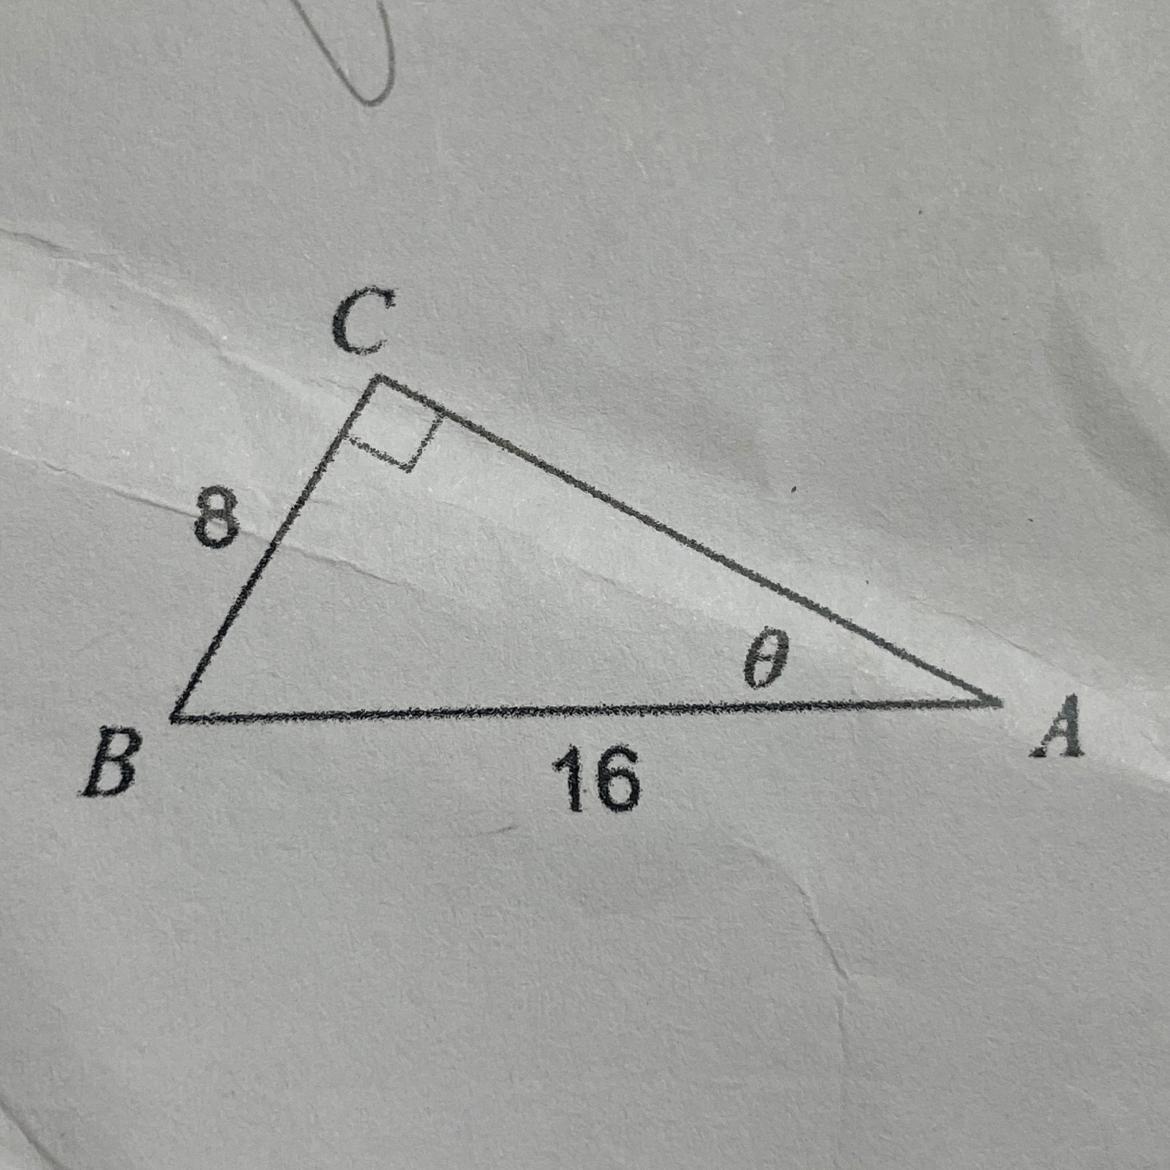 Find The Measures Of Angle And B. Round To The Nearest Degree.